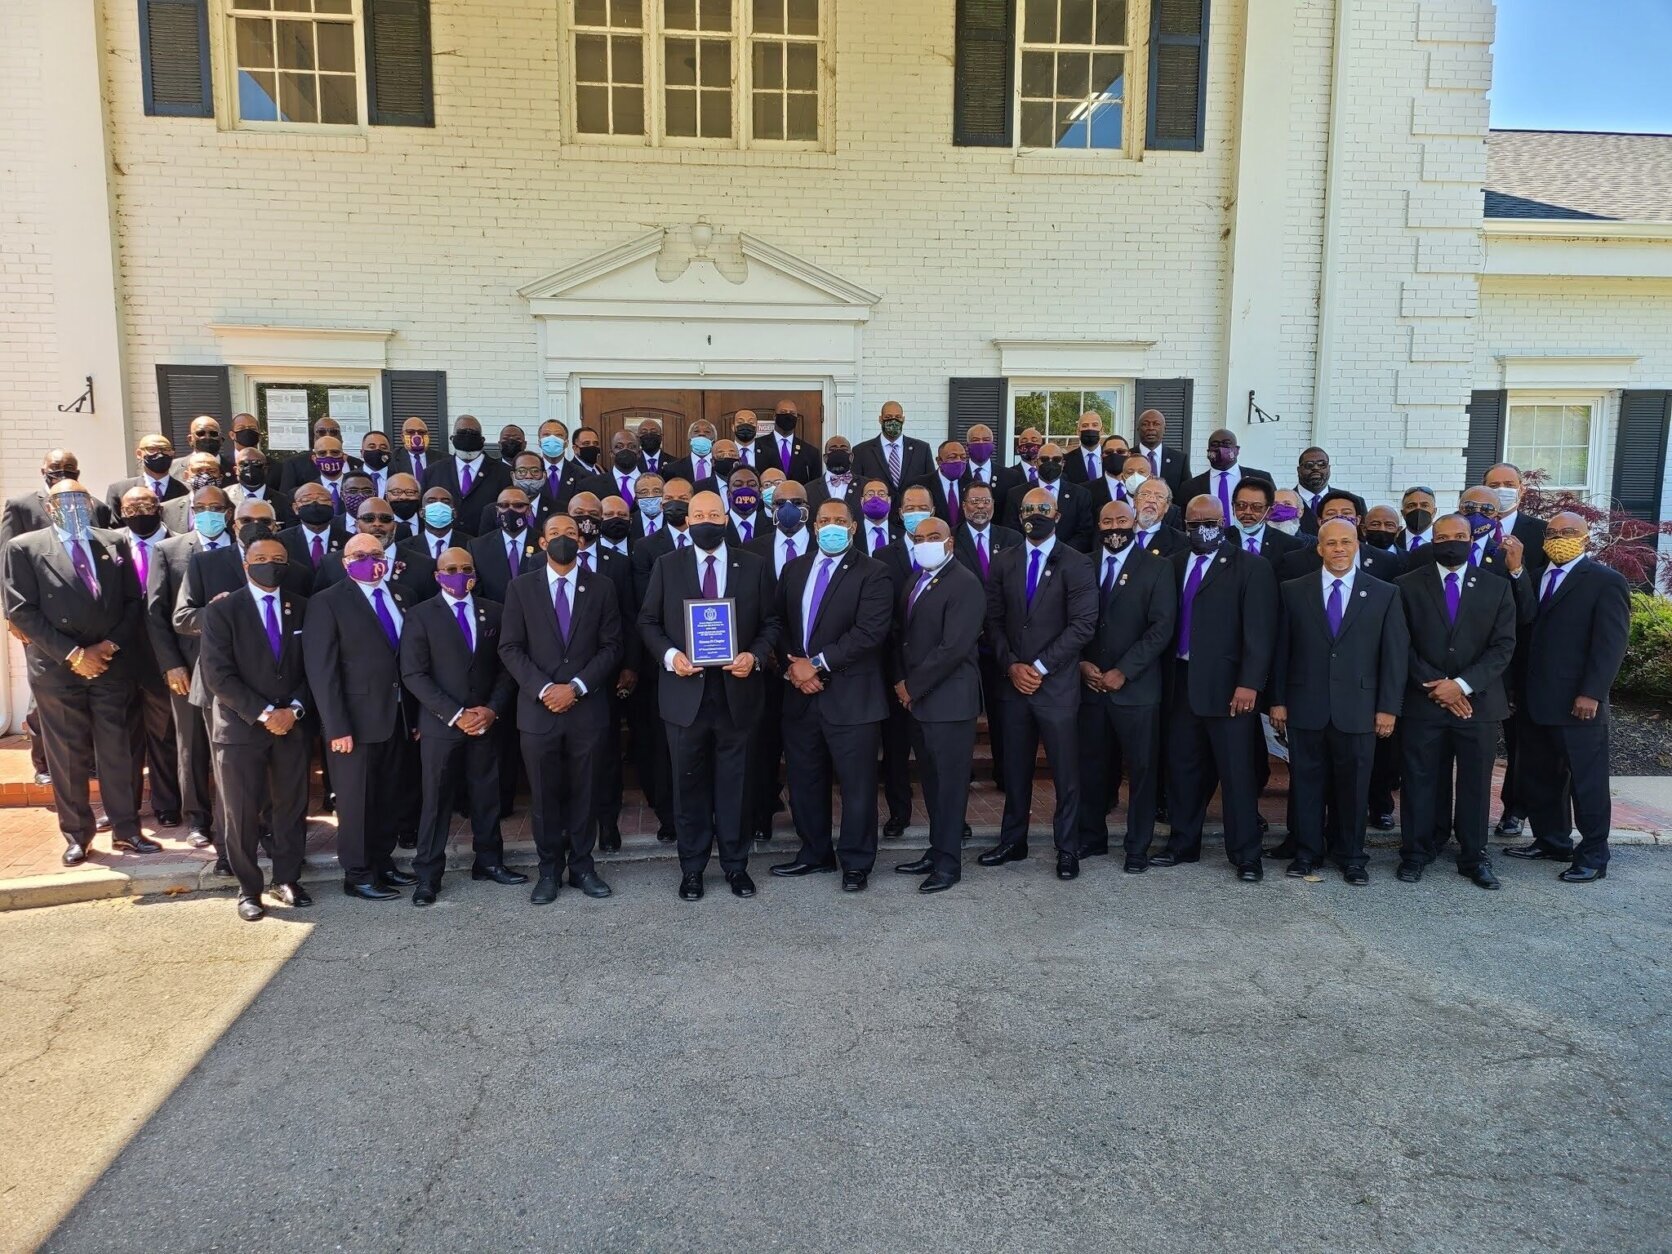 Members of the Gamma Pi Chapter of Omega Psi Phi. (Courtesy Richard Allison and Omega Psi Phi)